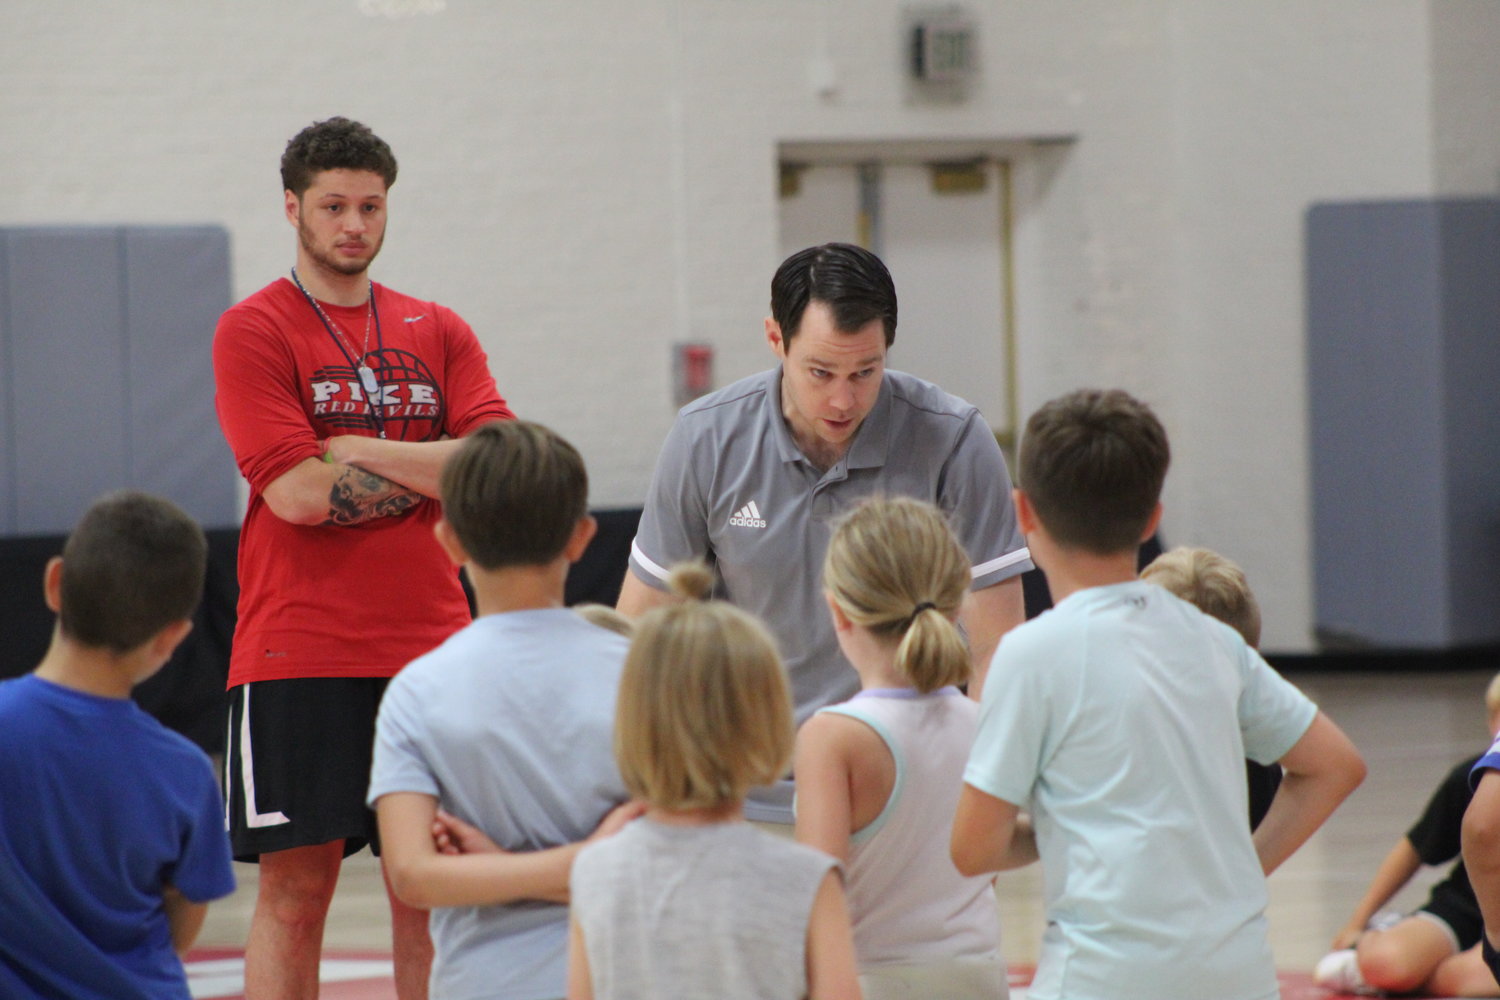 Wabash Basketball Assistant Coach Pat Sullivan instructs some of the campers during the skills camp hosted by the Little Giants. The camp has over 80 kids in attendance.